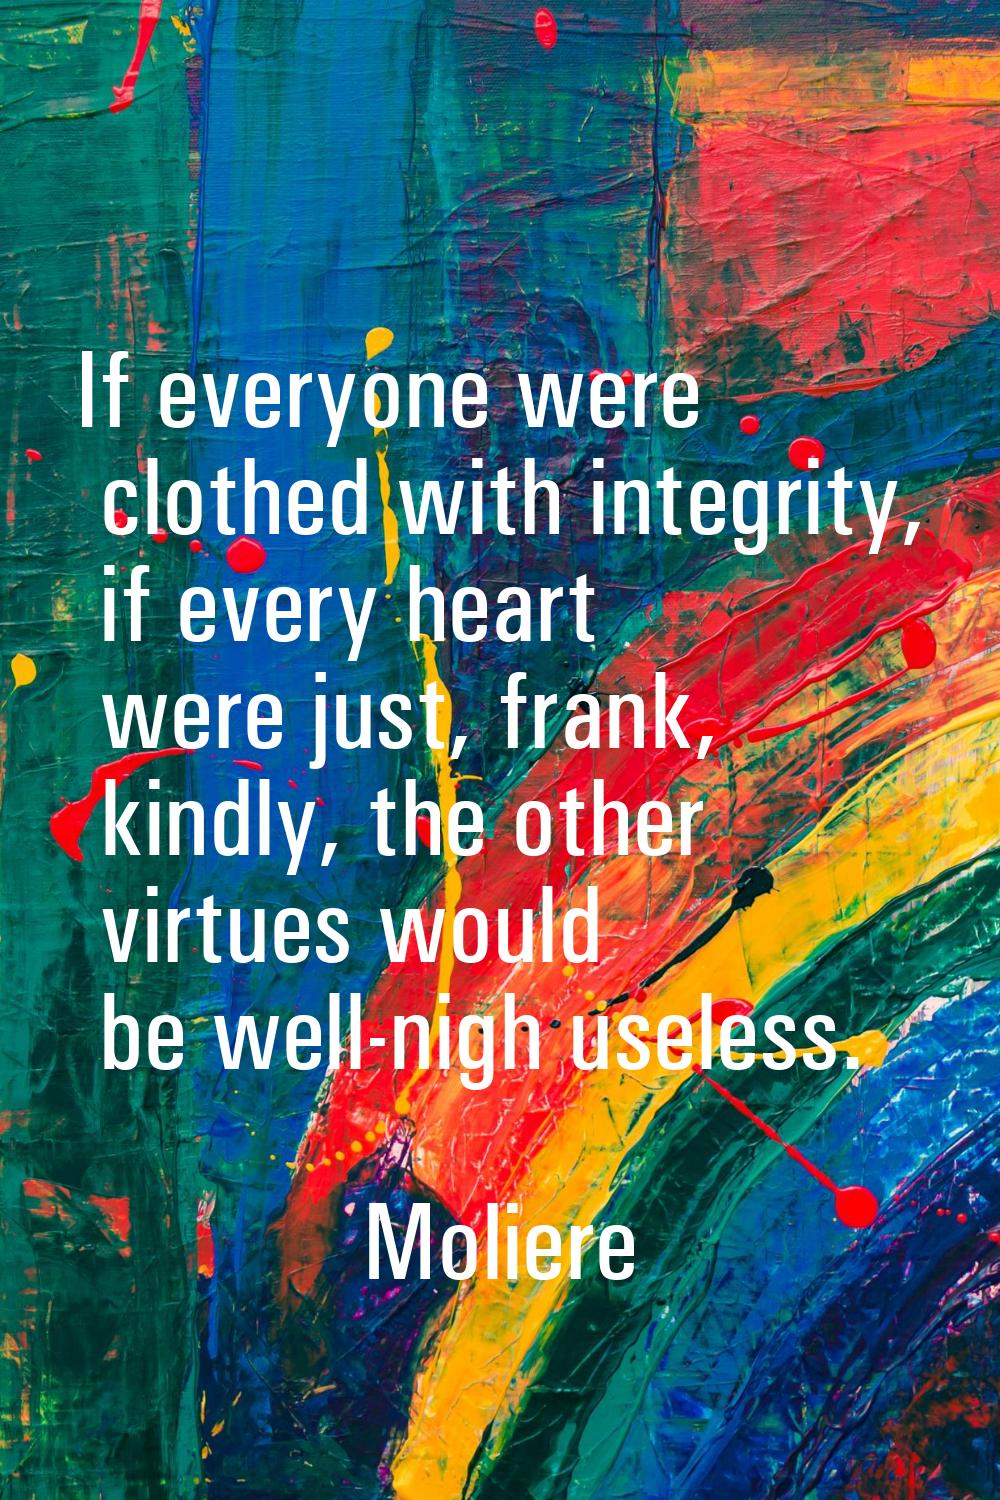 If everyone were clothed with integrity, if every heart were just, frank, kindly, the other virtues